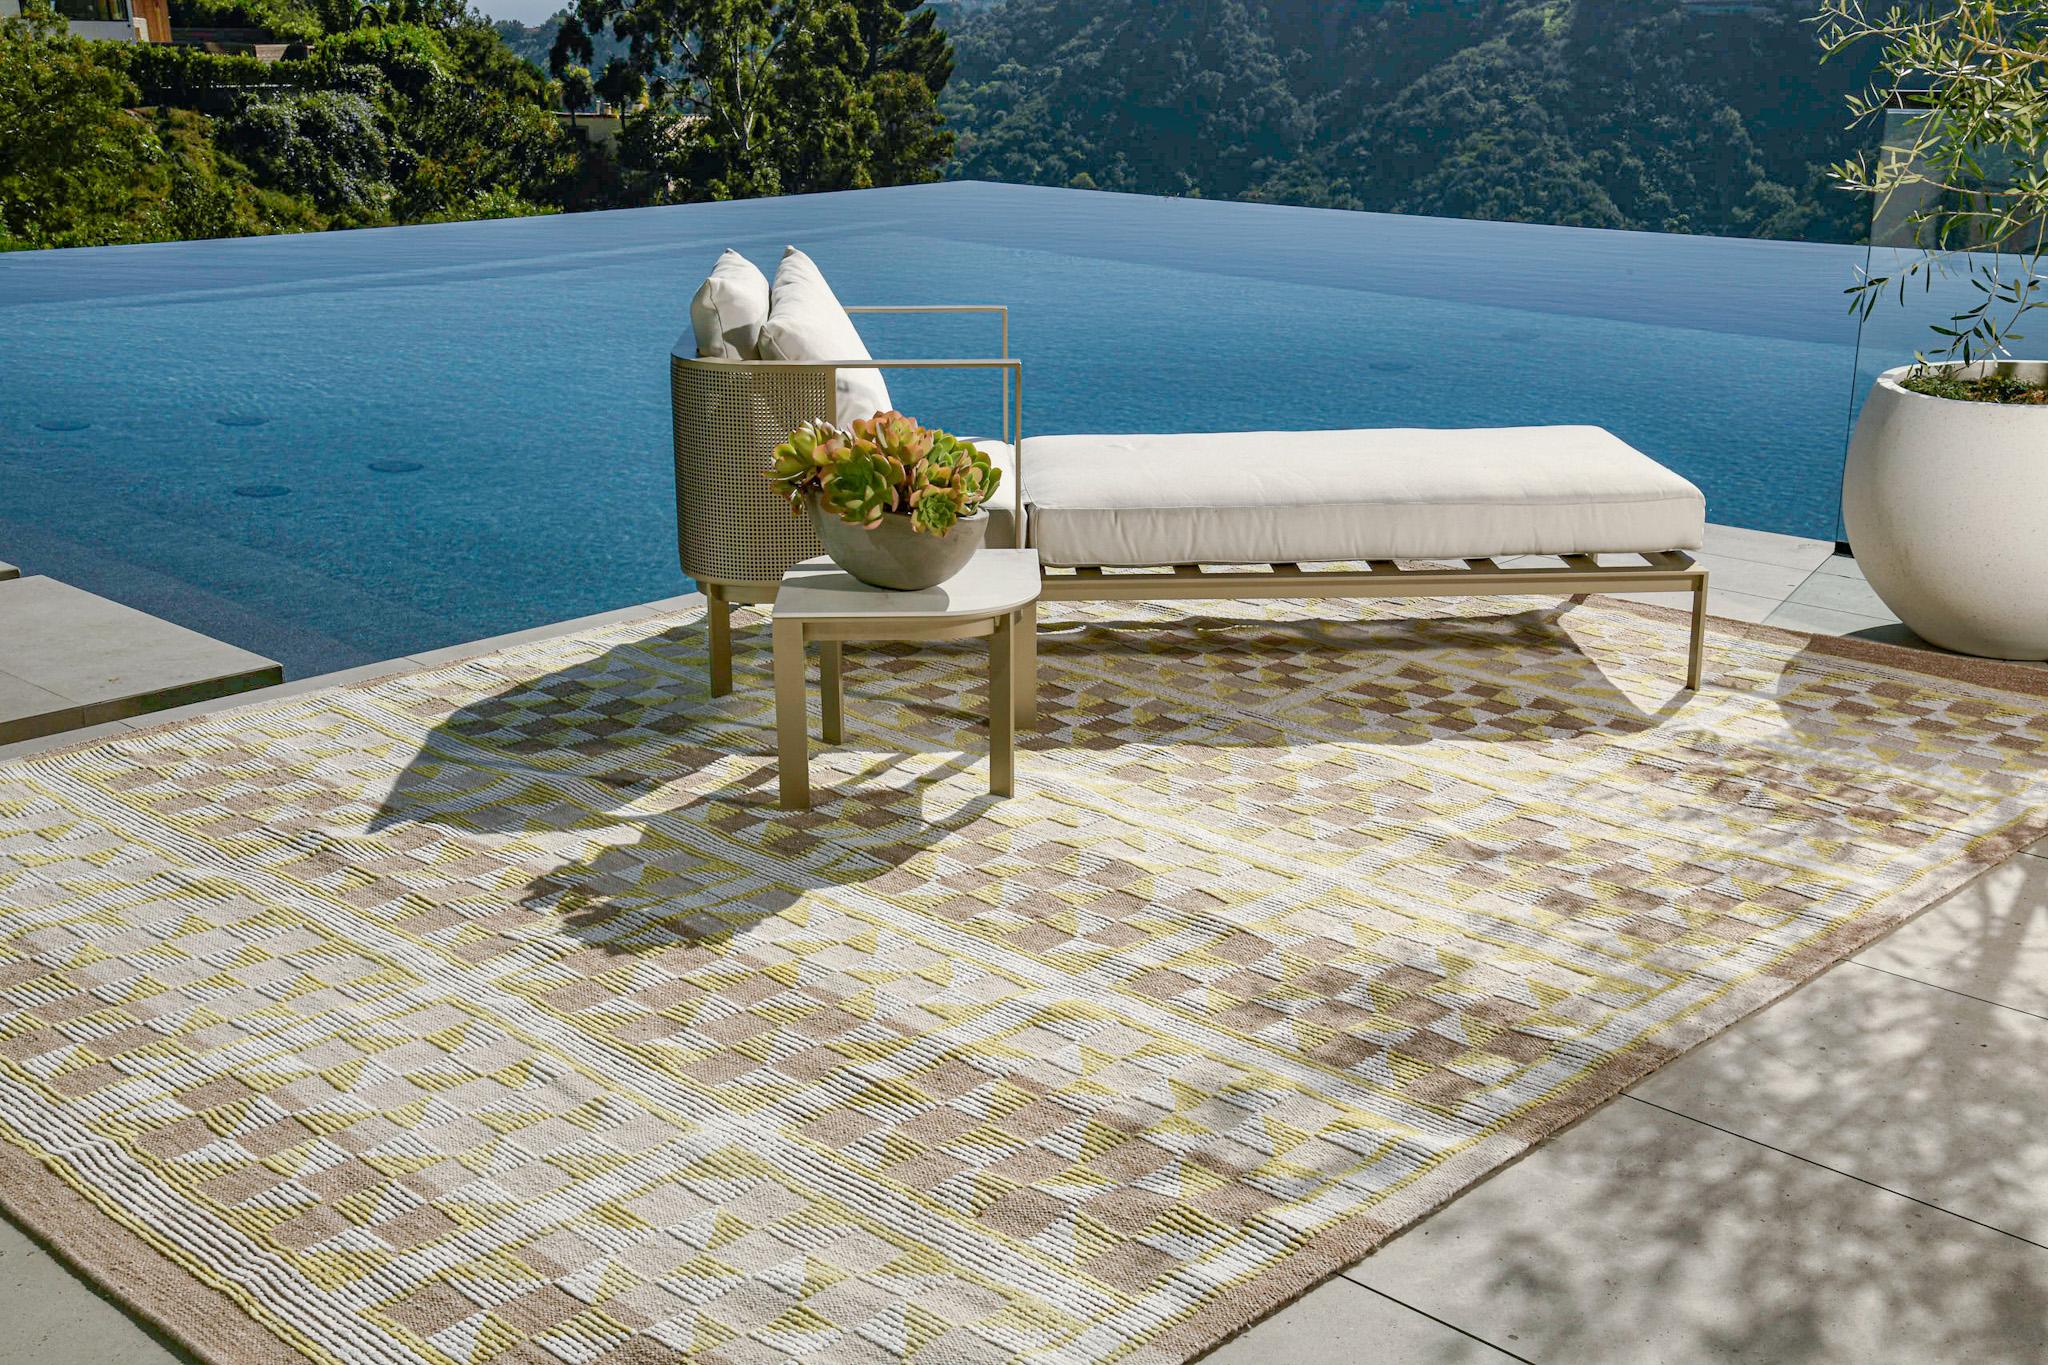 Enjoy the fresh air with Nasim, rugs that work indoors and out.

Rug Number
31424
Size
9' 0